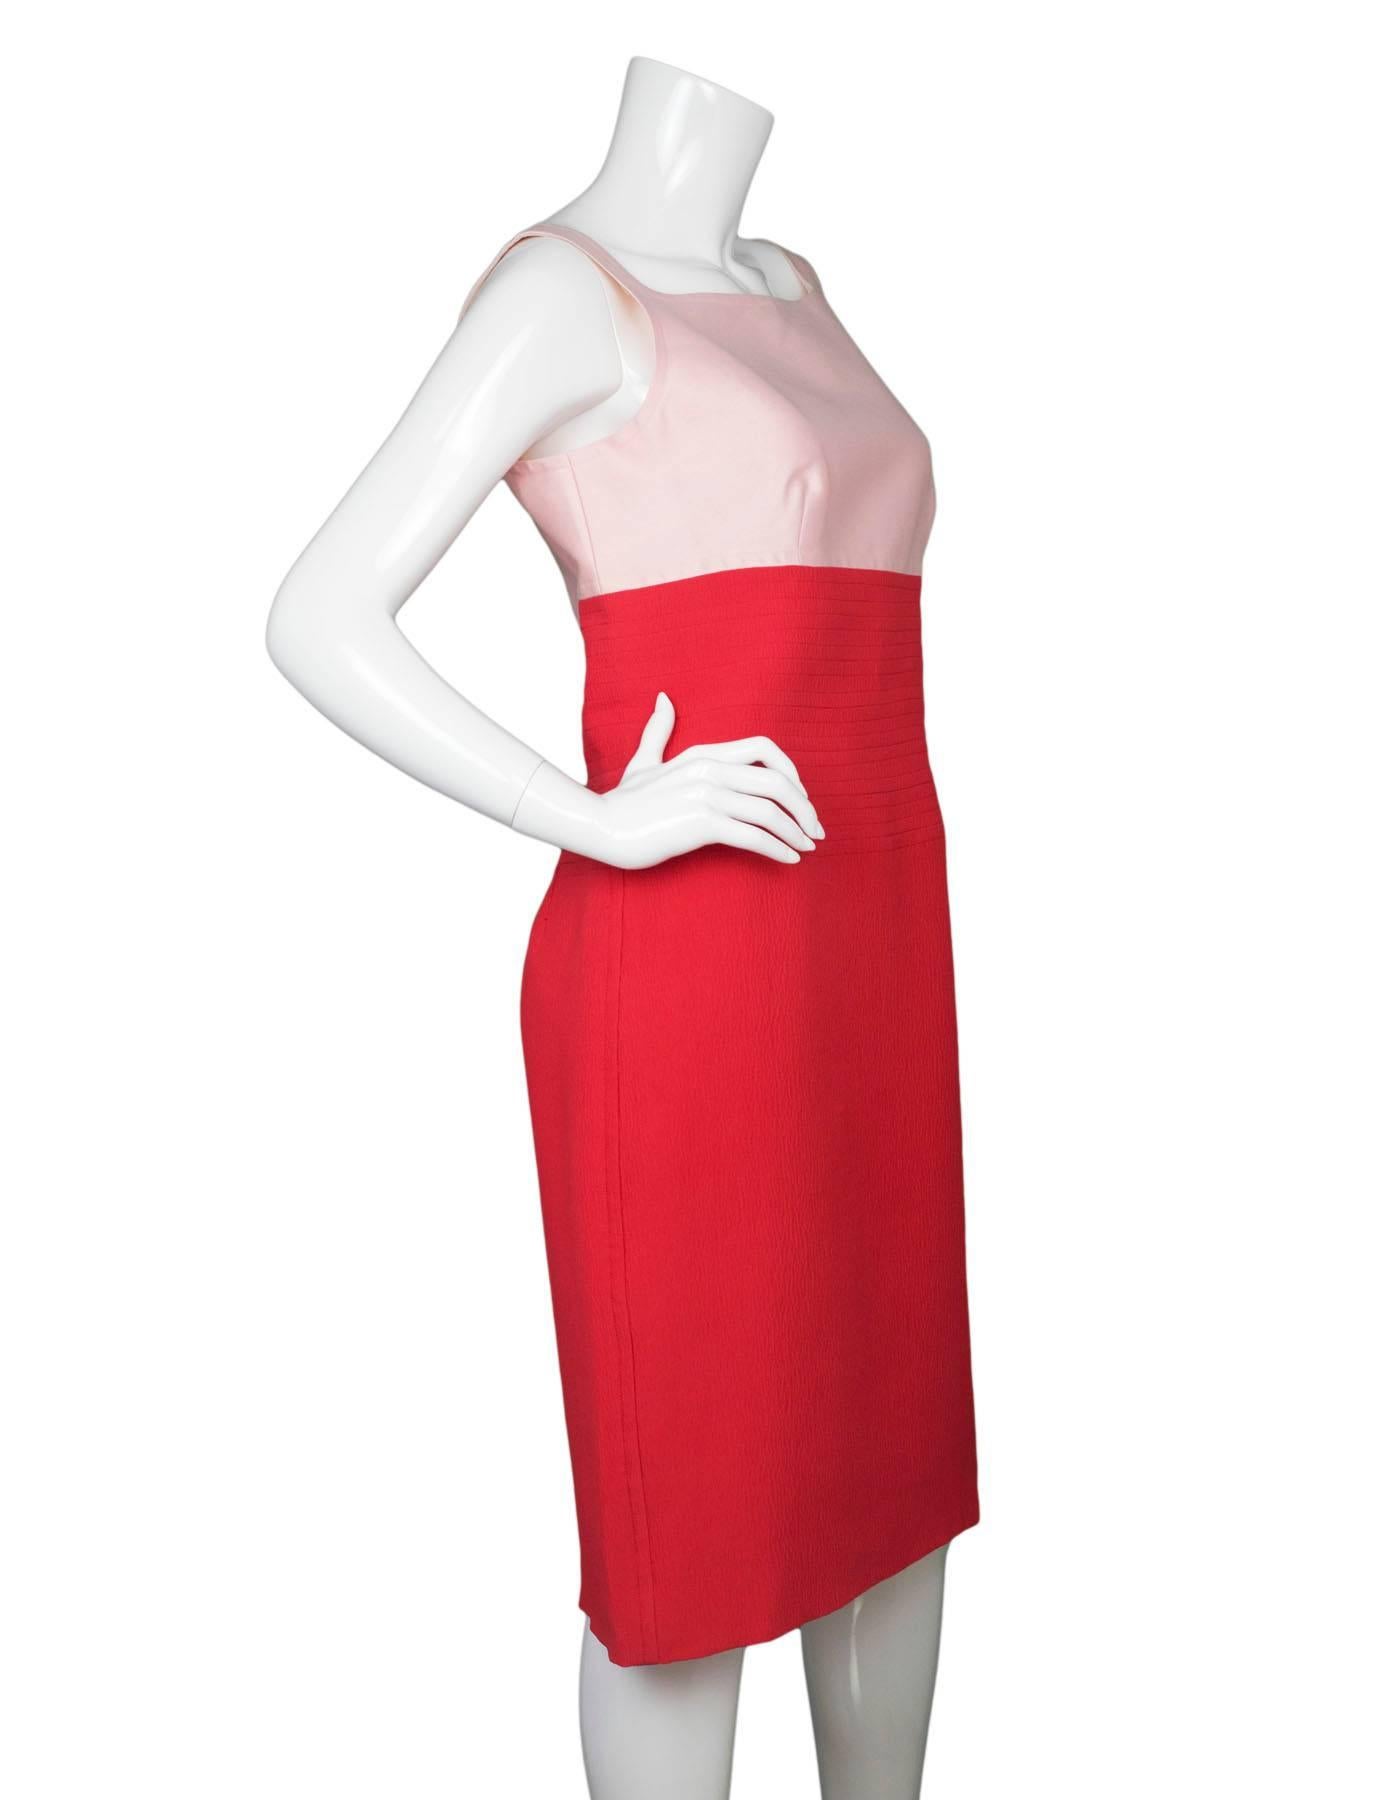 Oscar De La Renta Coral and Pink Dress Sz 12 NWT

From Spring 2009. Features empire waist and boat neckline.

Made In: USA
Color: Coral, pink
Composition: 93% Cotton, 7% Silk
Lining: Coral red silk
Closure/Opening: Back zip closure
Overall